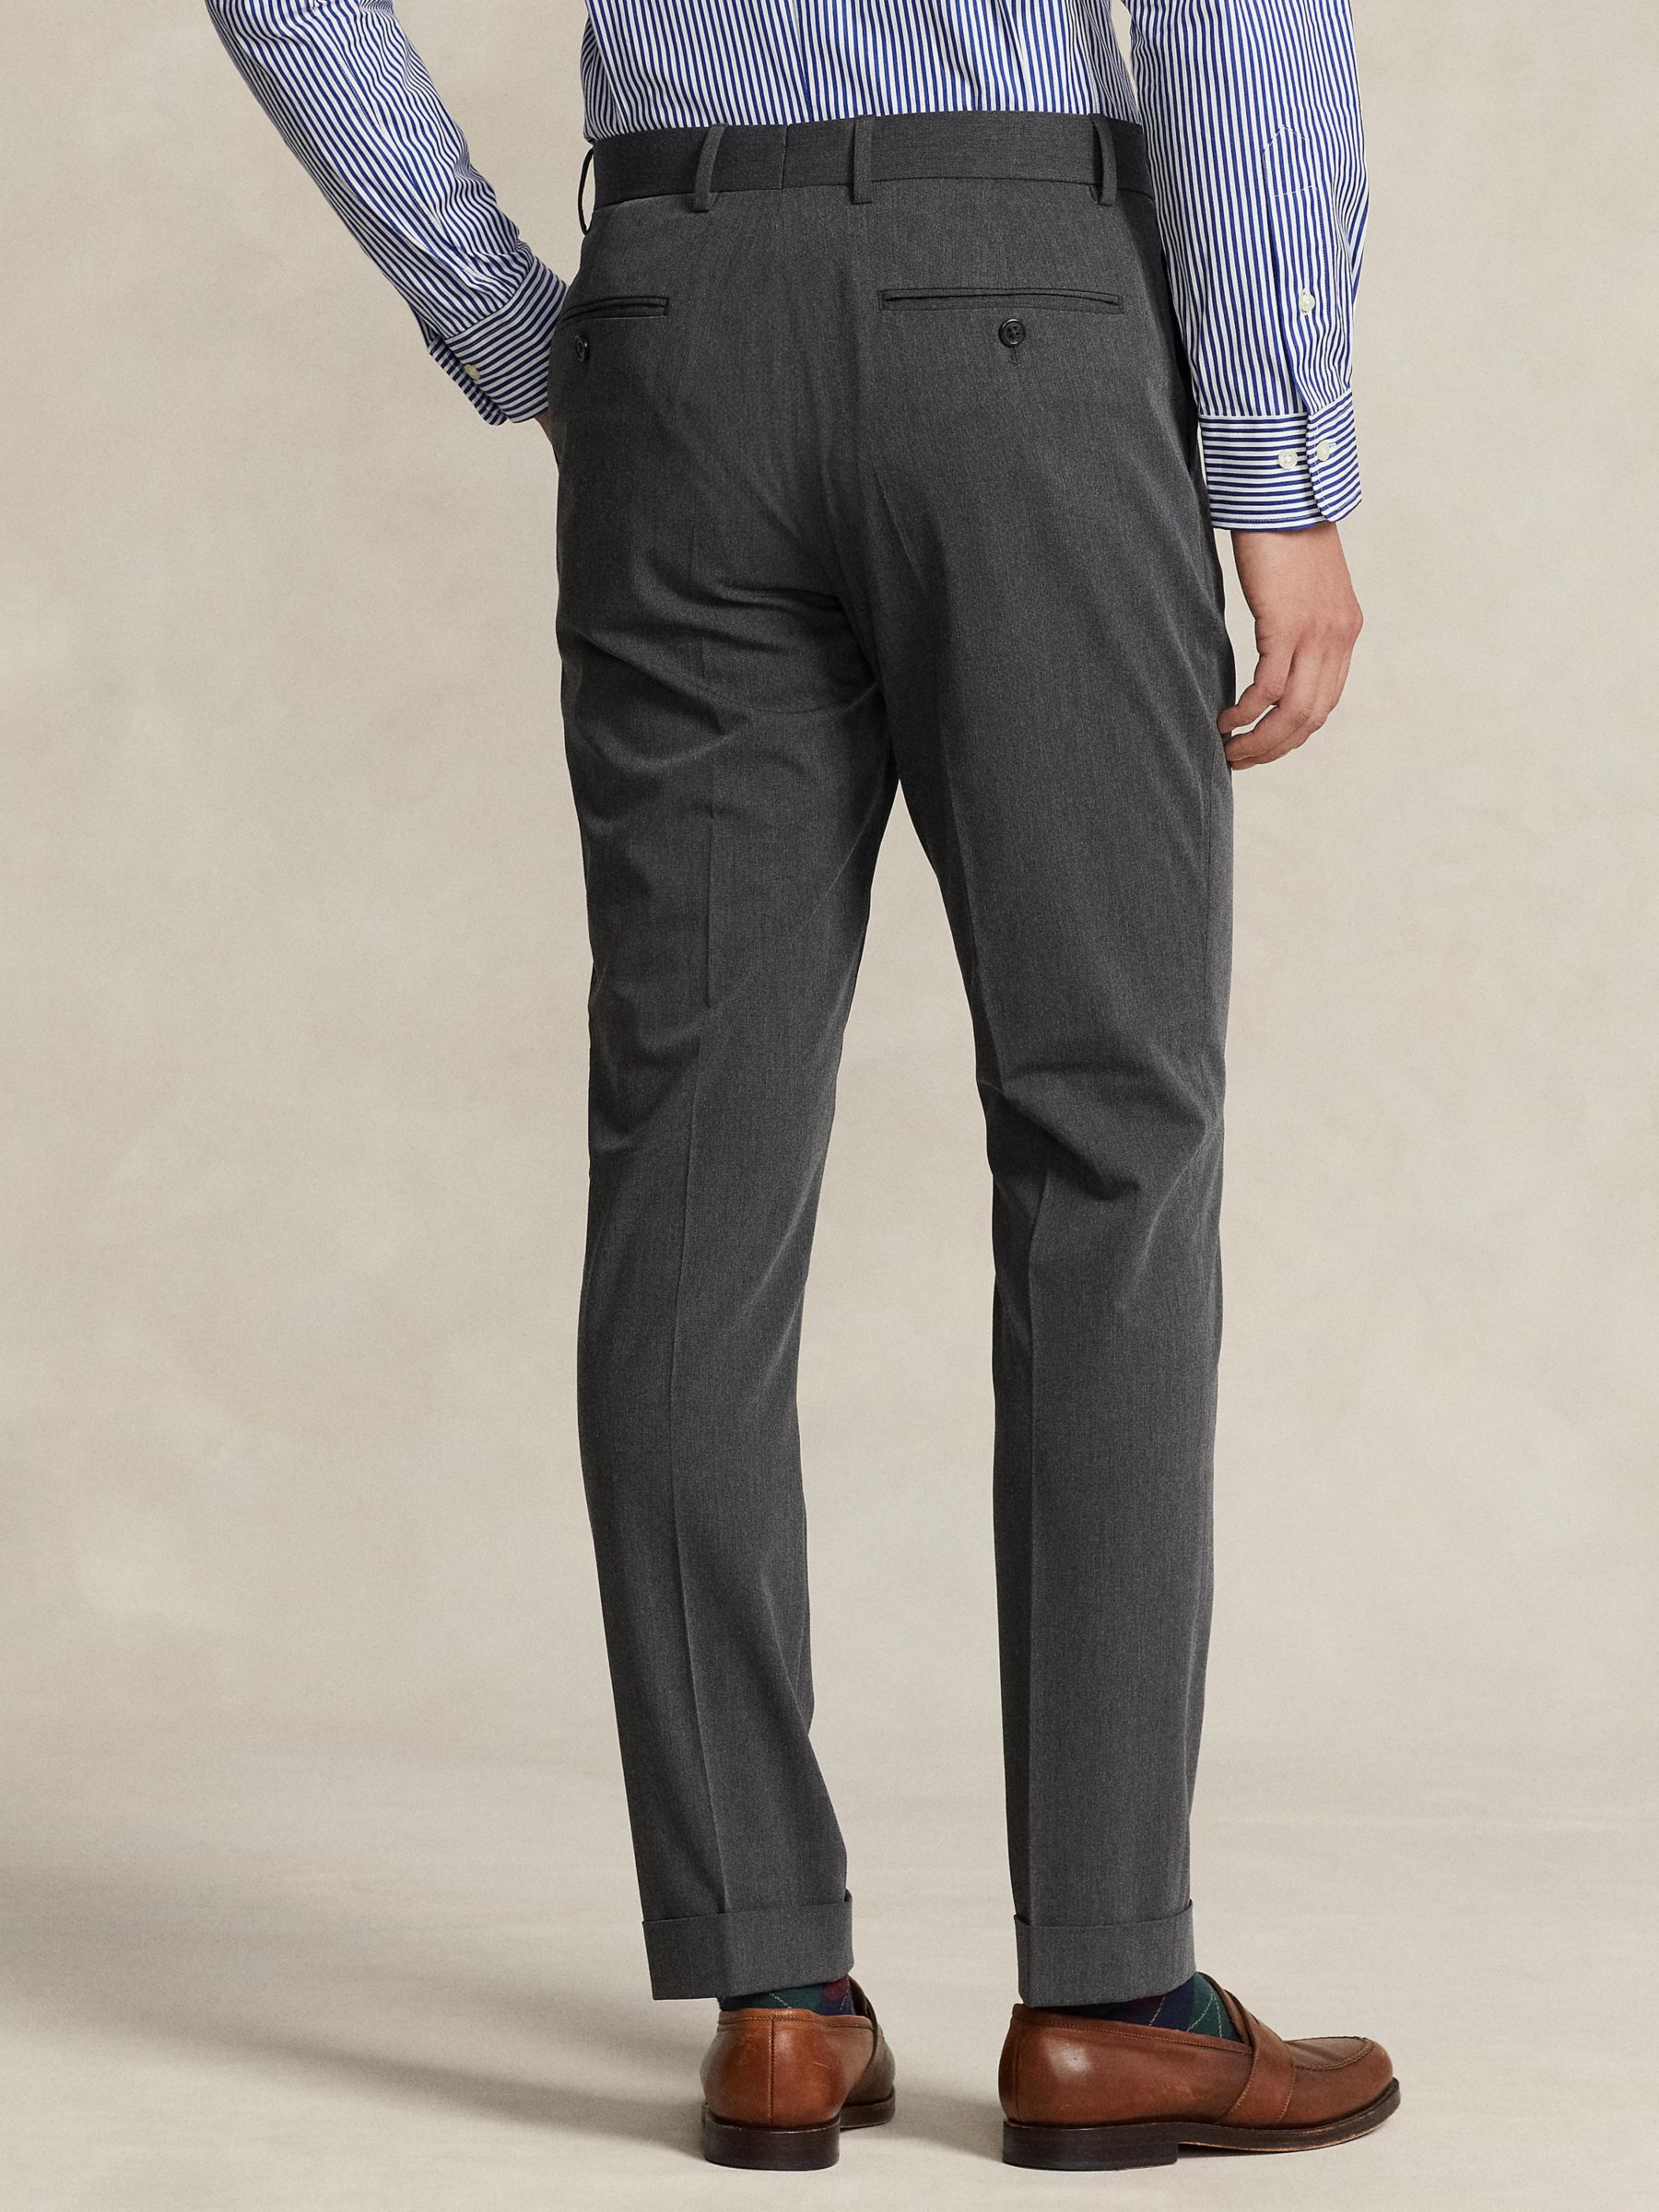 Buy Polo Ralph Lauren Performance Stretch Twill Trousers, Charcoal Online at johnlewis.com